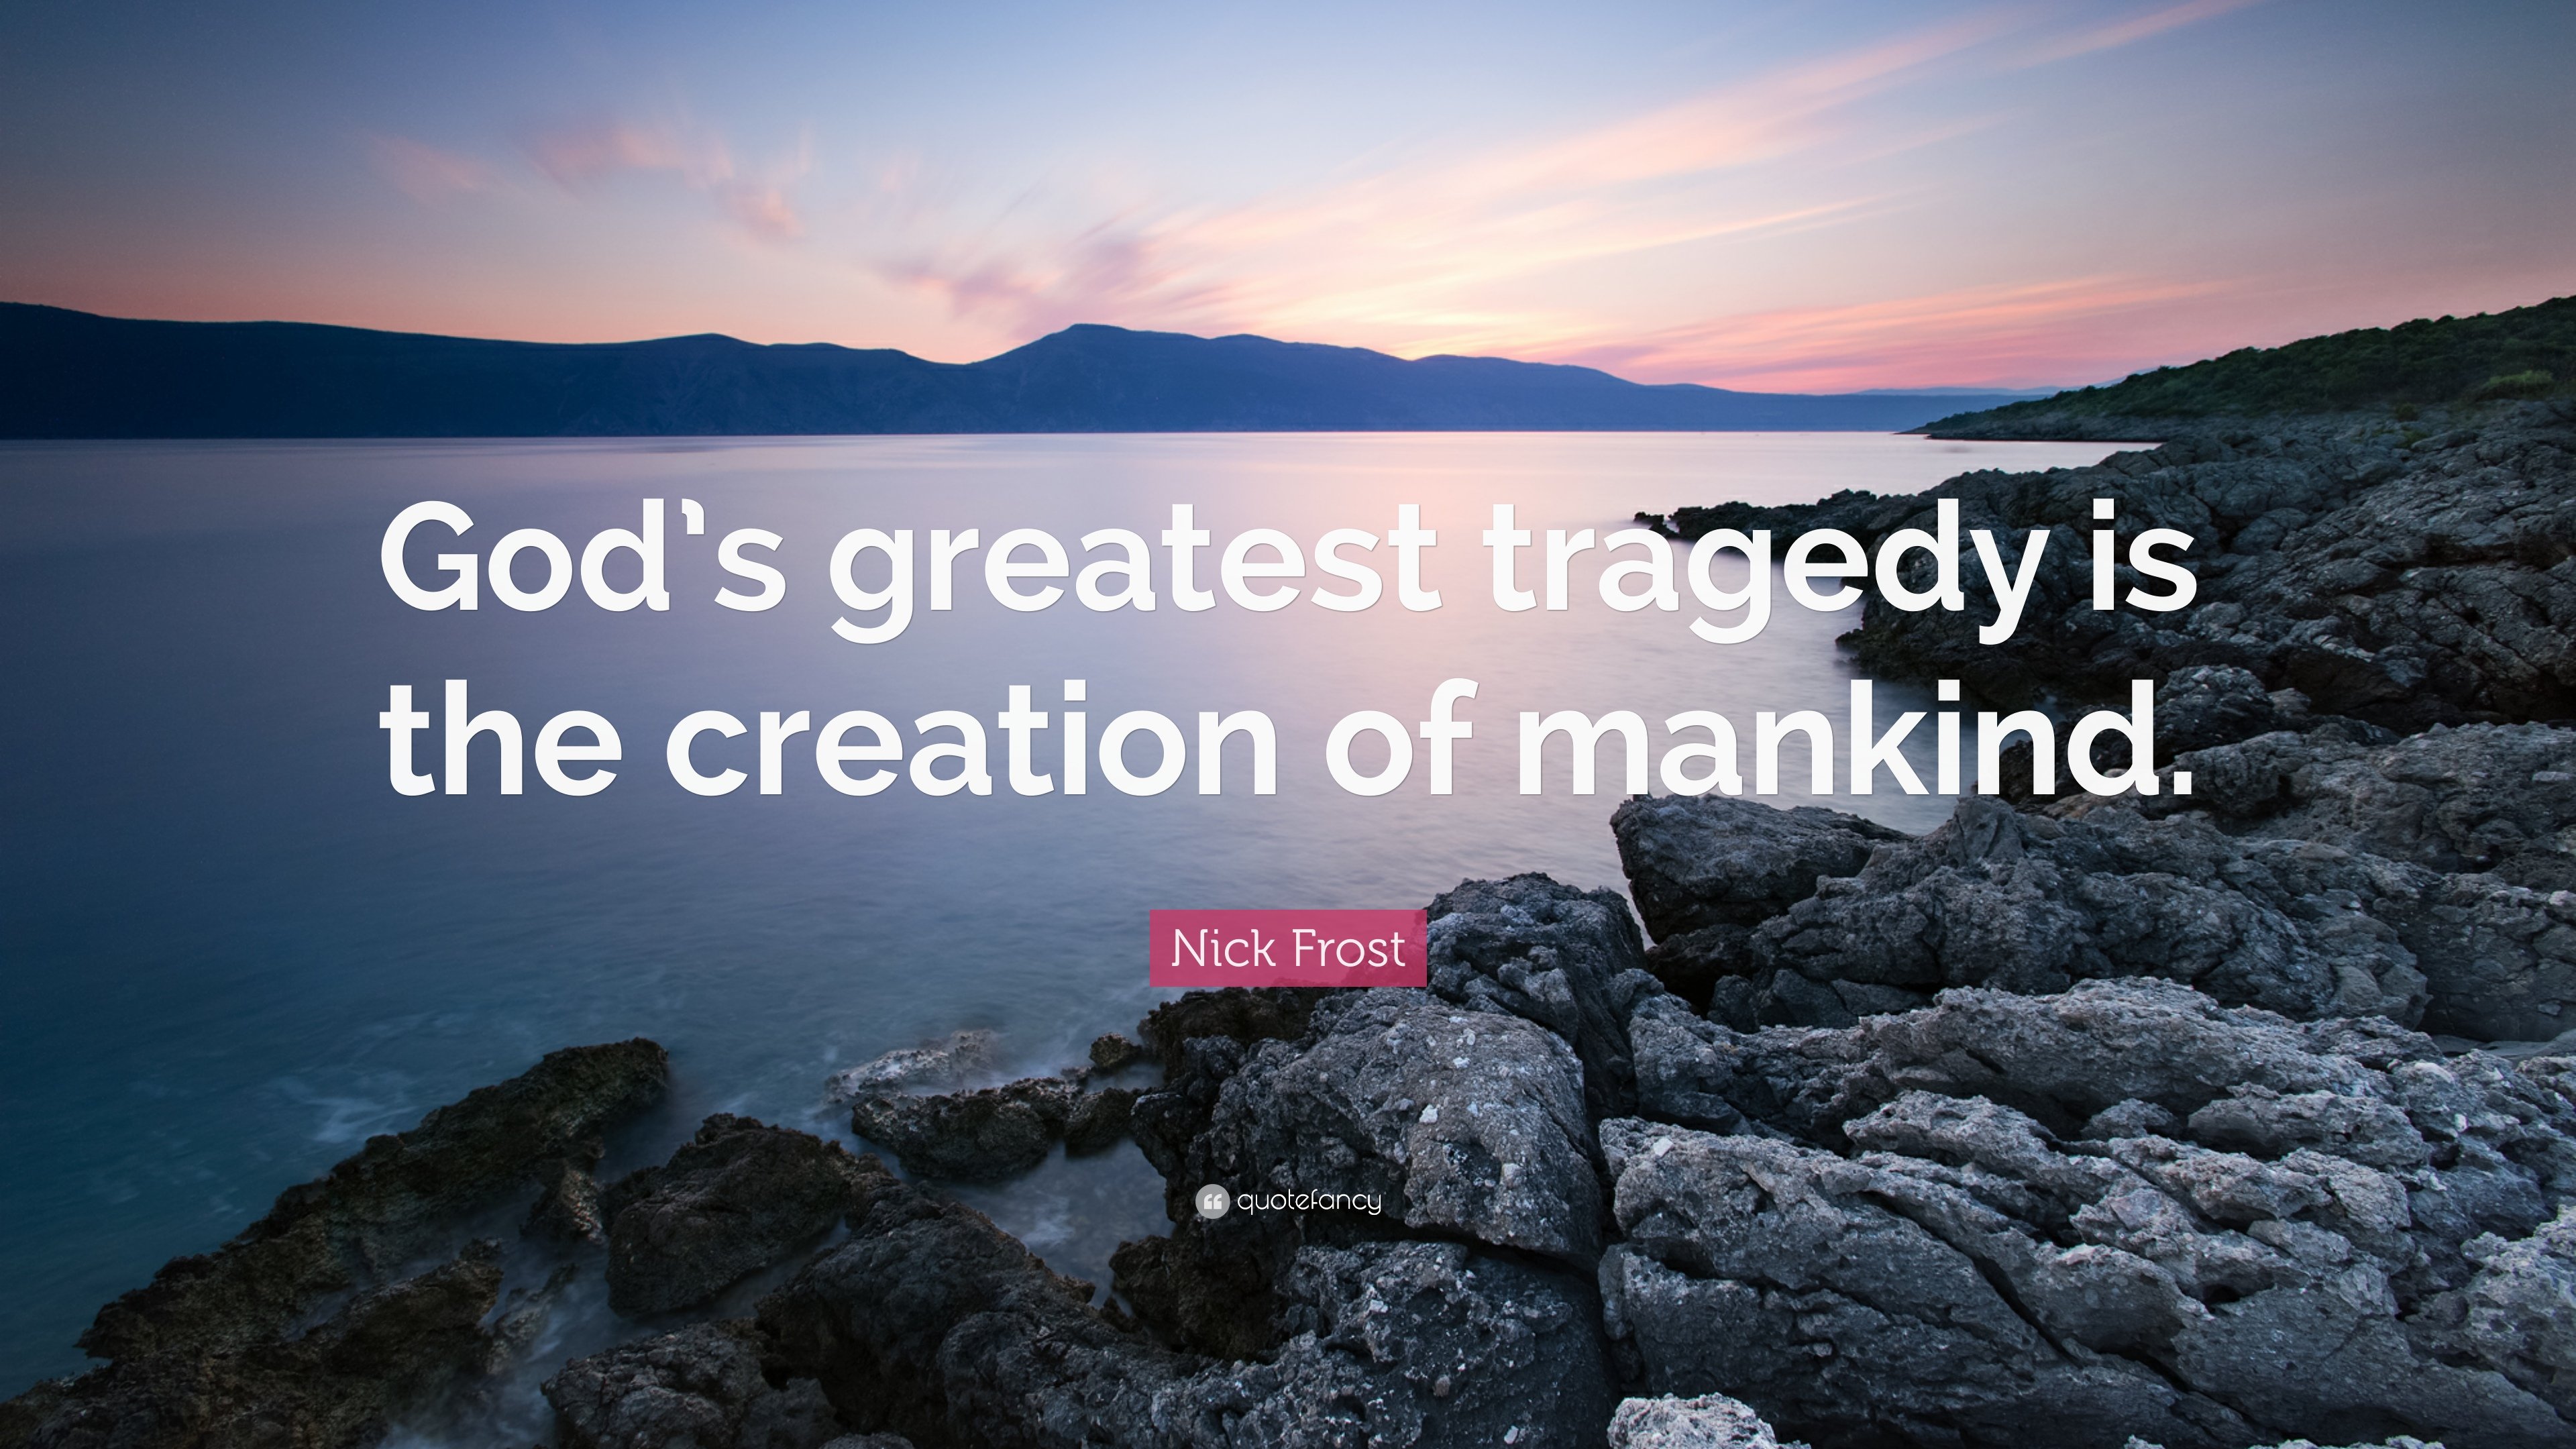 Nick Frost Quote: “God's greatest tragedy is the creation